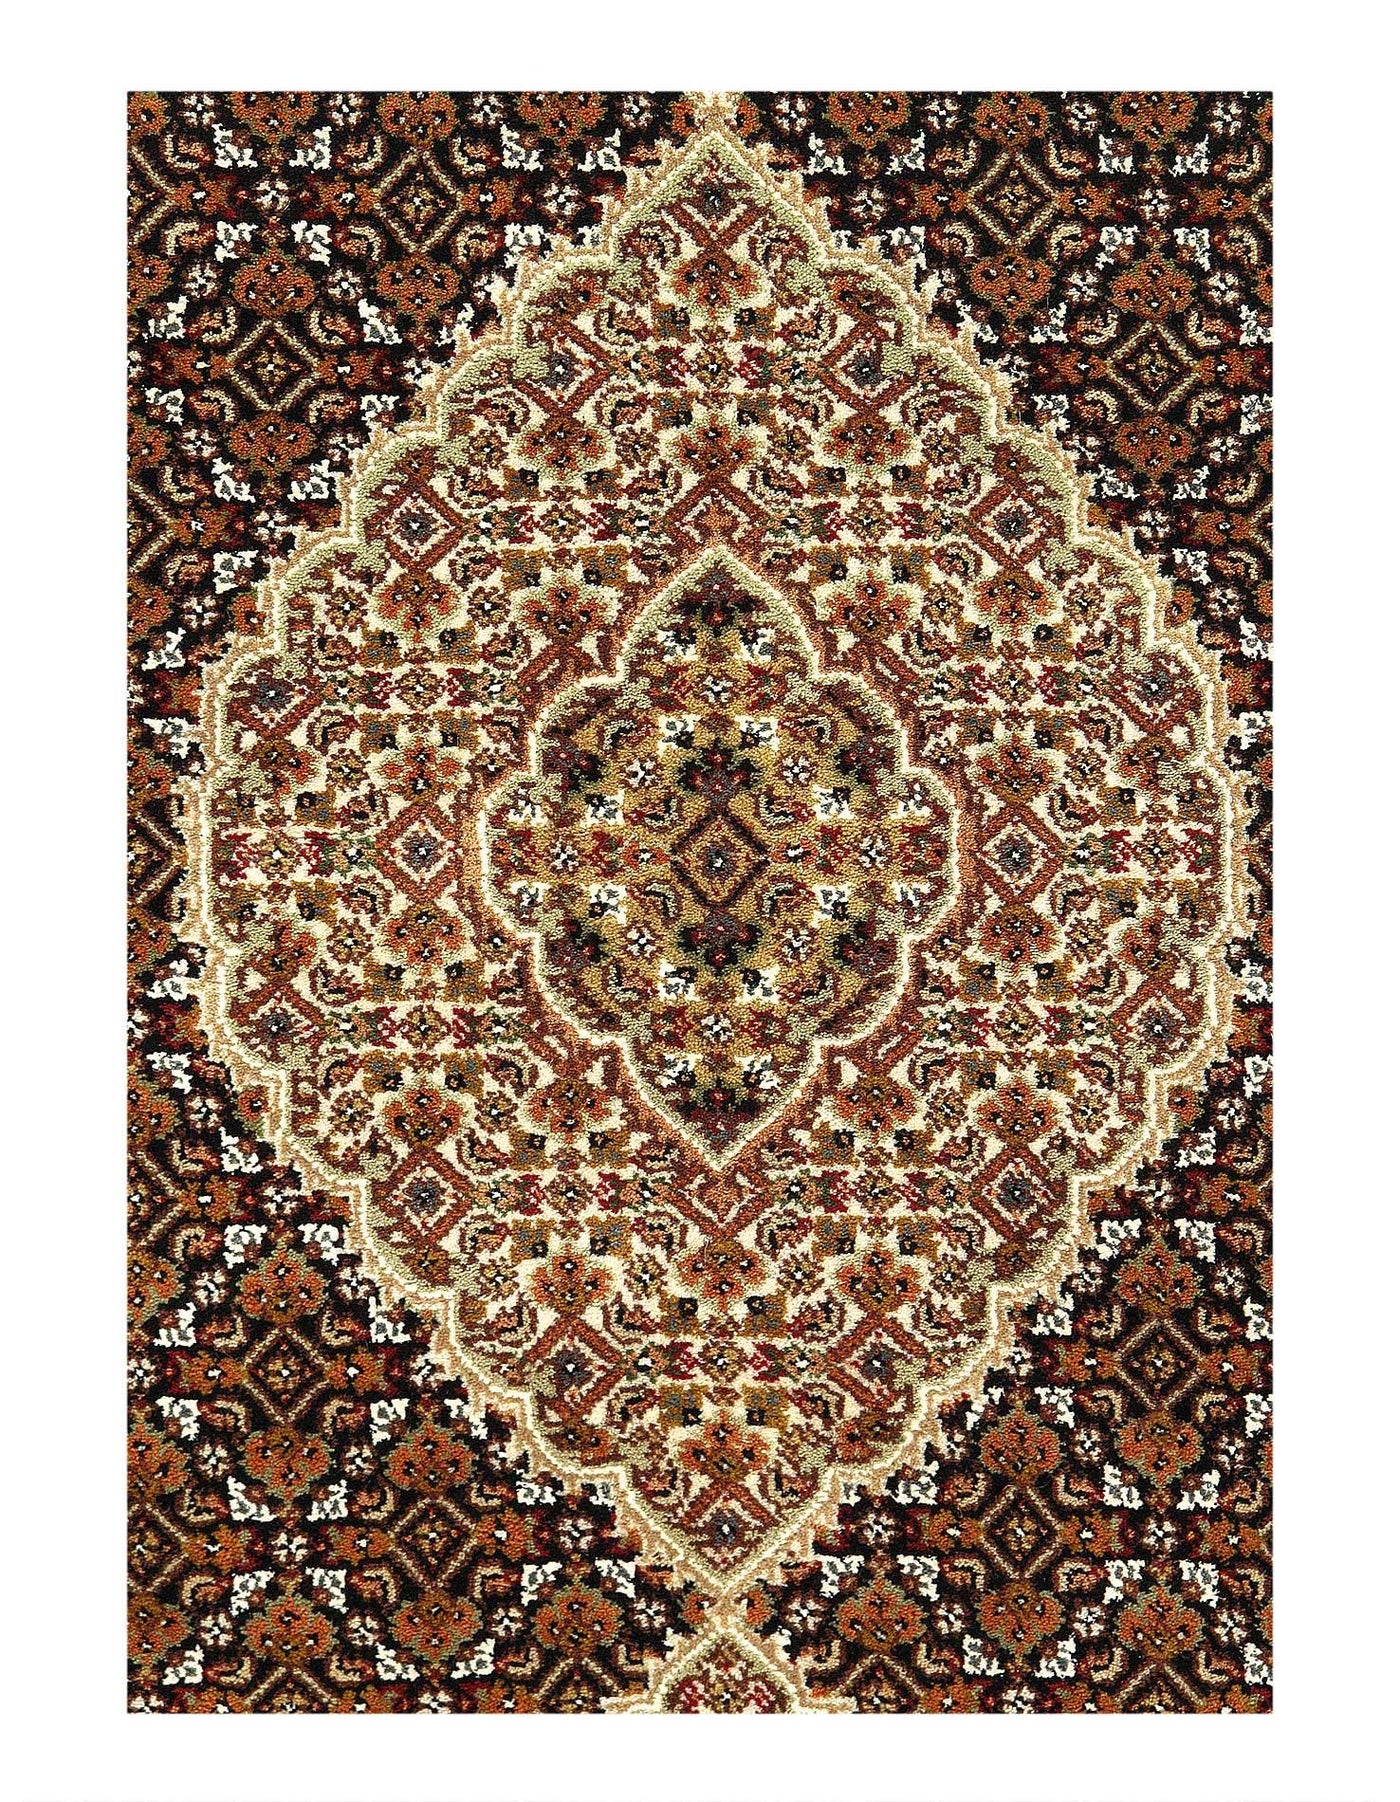 Canvello Fine Hand Knotted Silk & wool Tabriz - 4'9'' X 6'11'' - Canvello